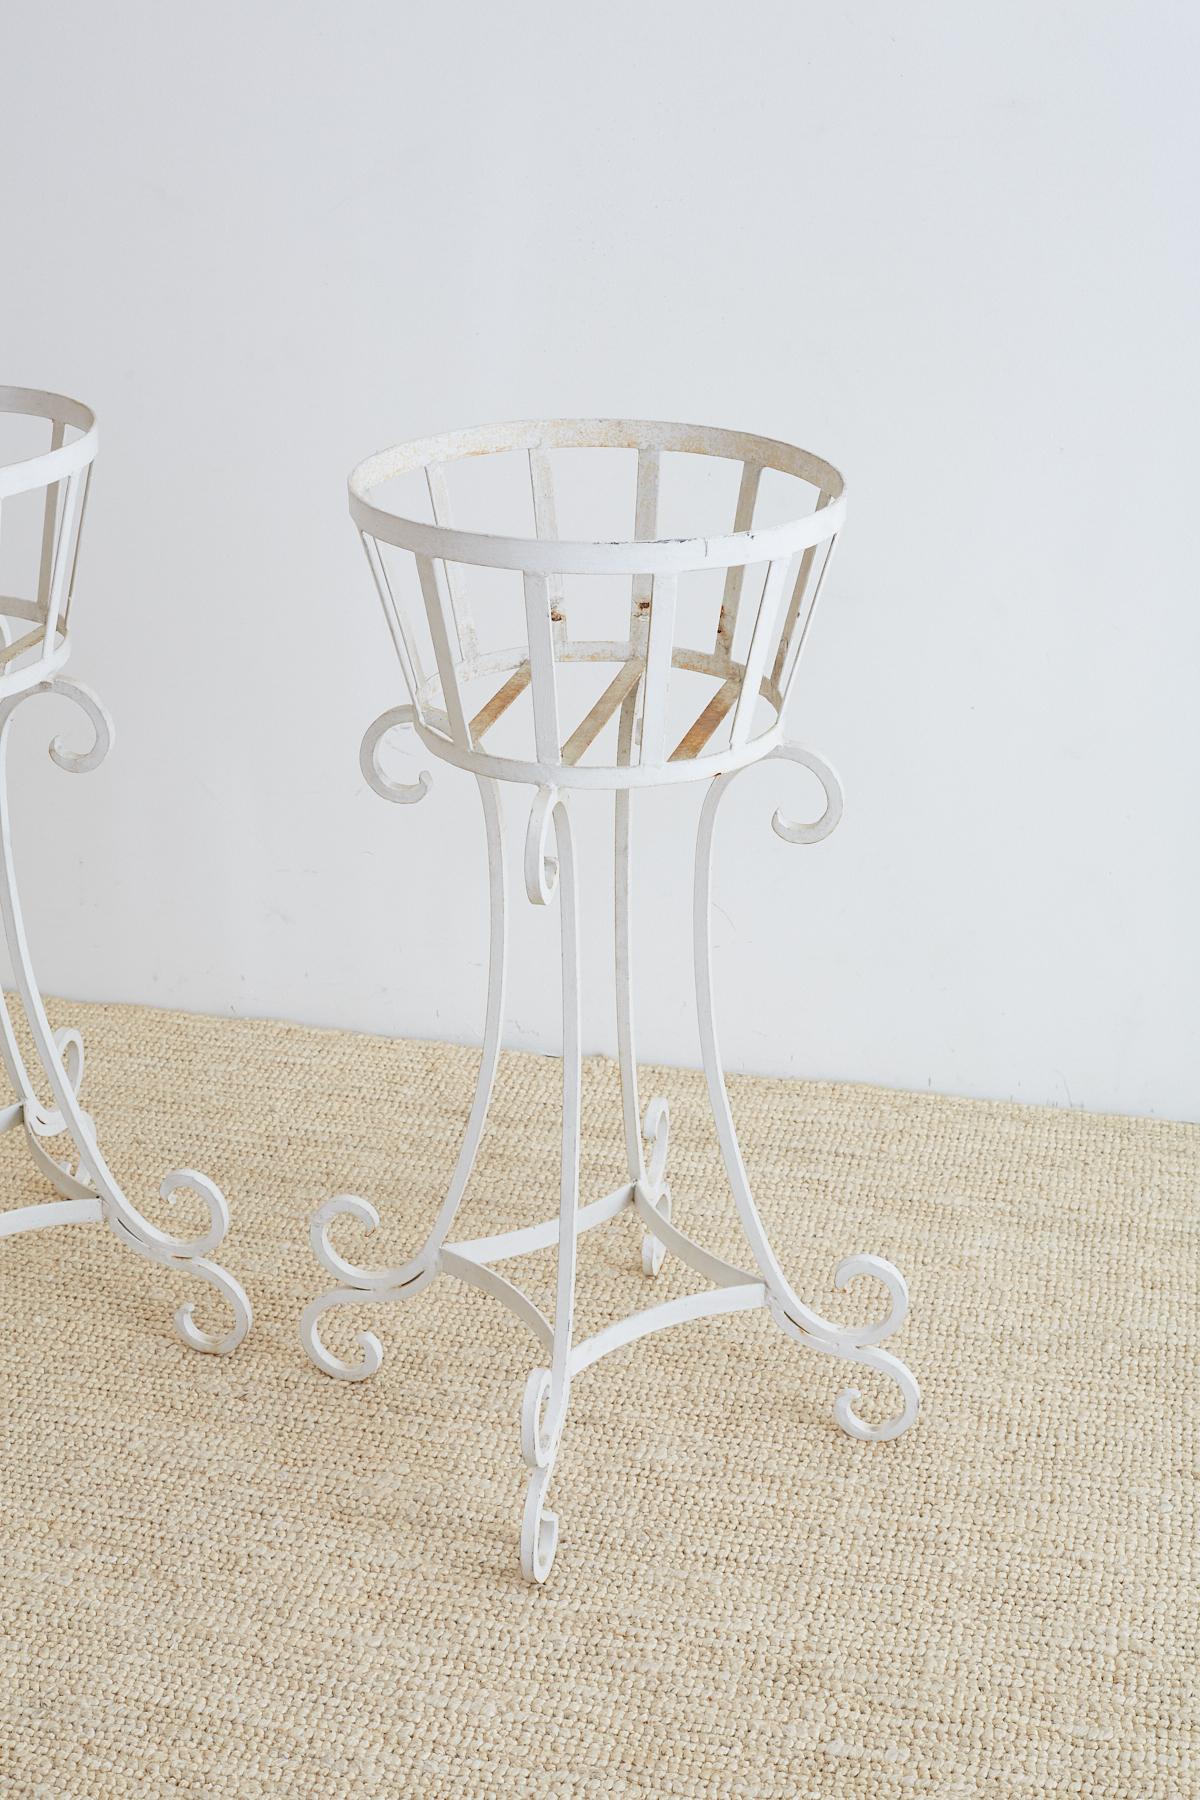 American Set of Four Wrought Iron Painted Plant Stands